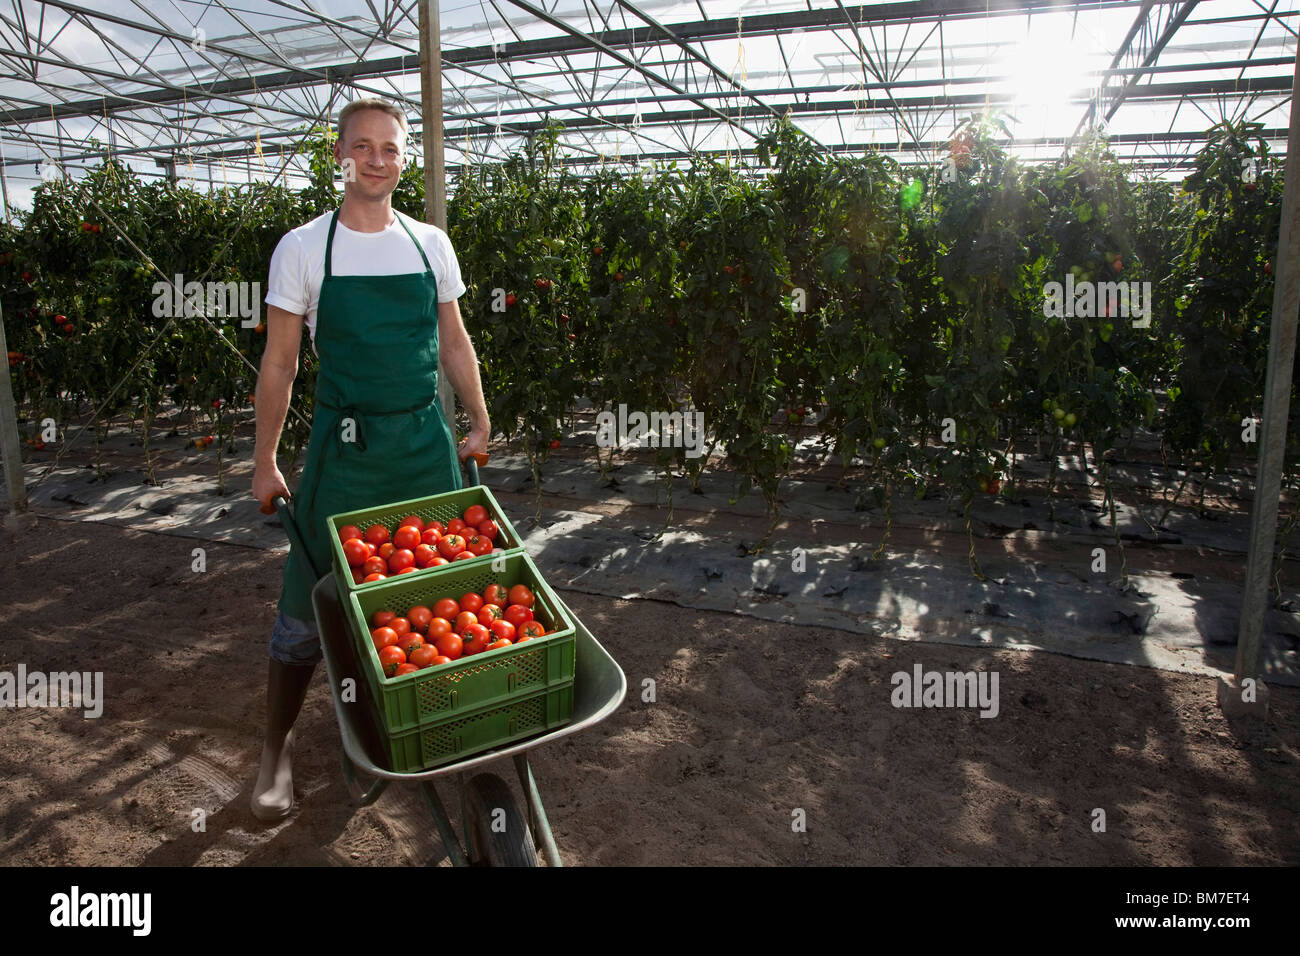 A man wheeling crates of tomatoes in a greenhouse Stock Photo